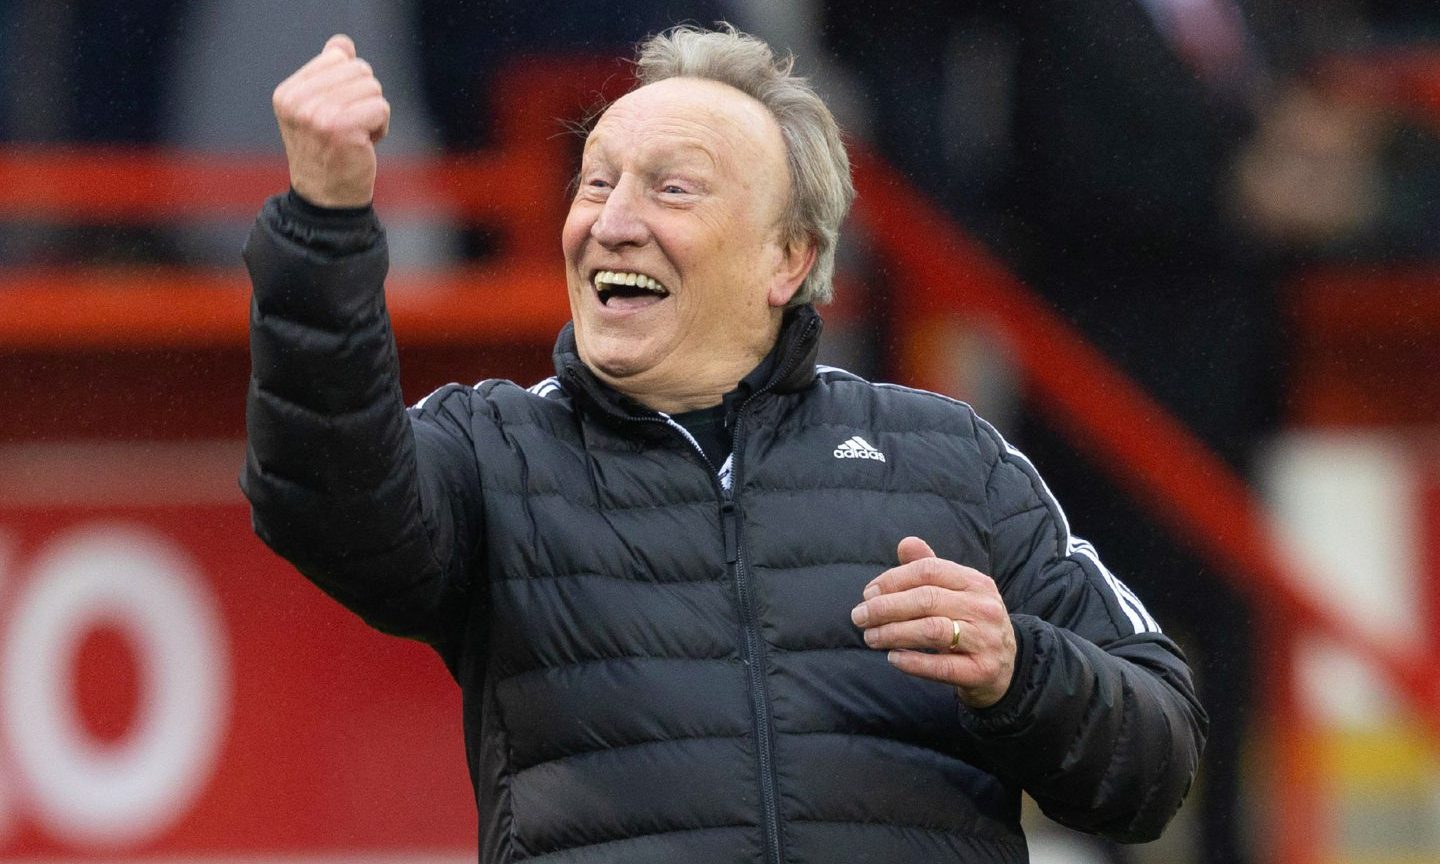 Neil Warnock celebrates at full-time after Aberdeen beat Kilmarnock in the Scottish Cup quarter-final. 